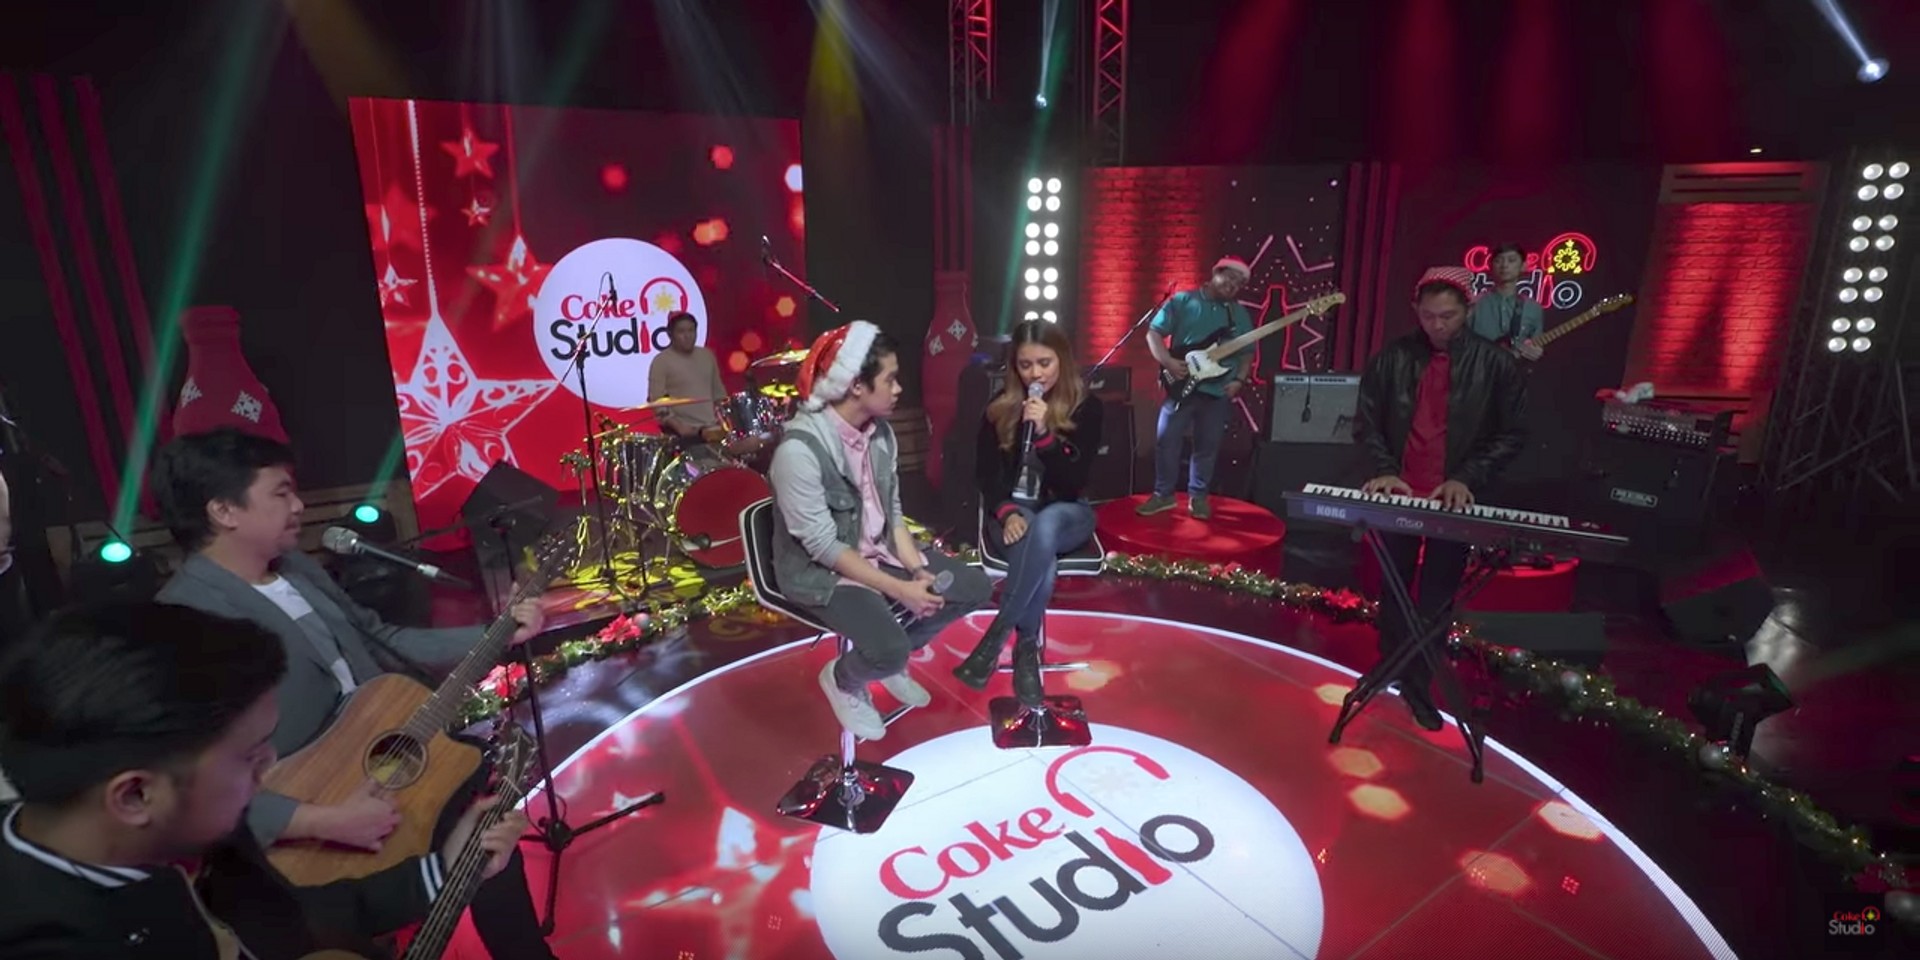 Watch Sandwich, Autotelic, Jensen and the Flips, and more perform Christmas carols